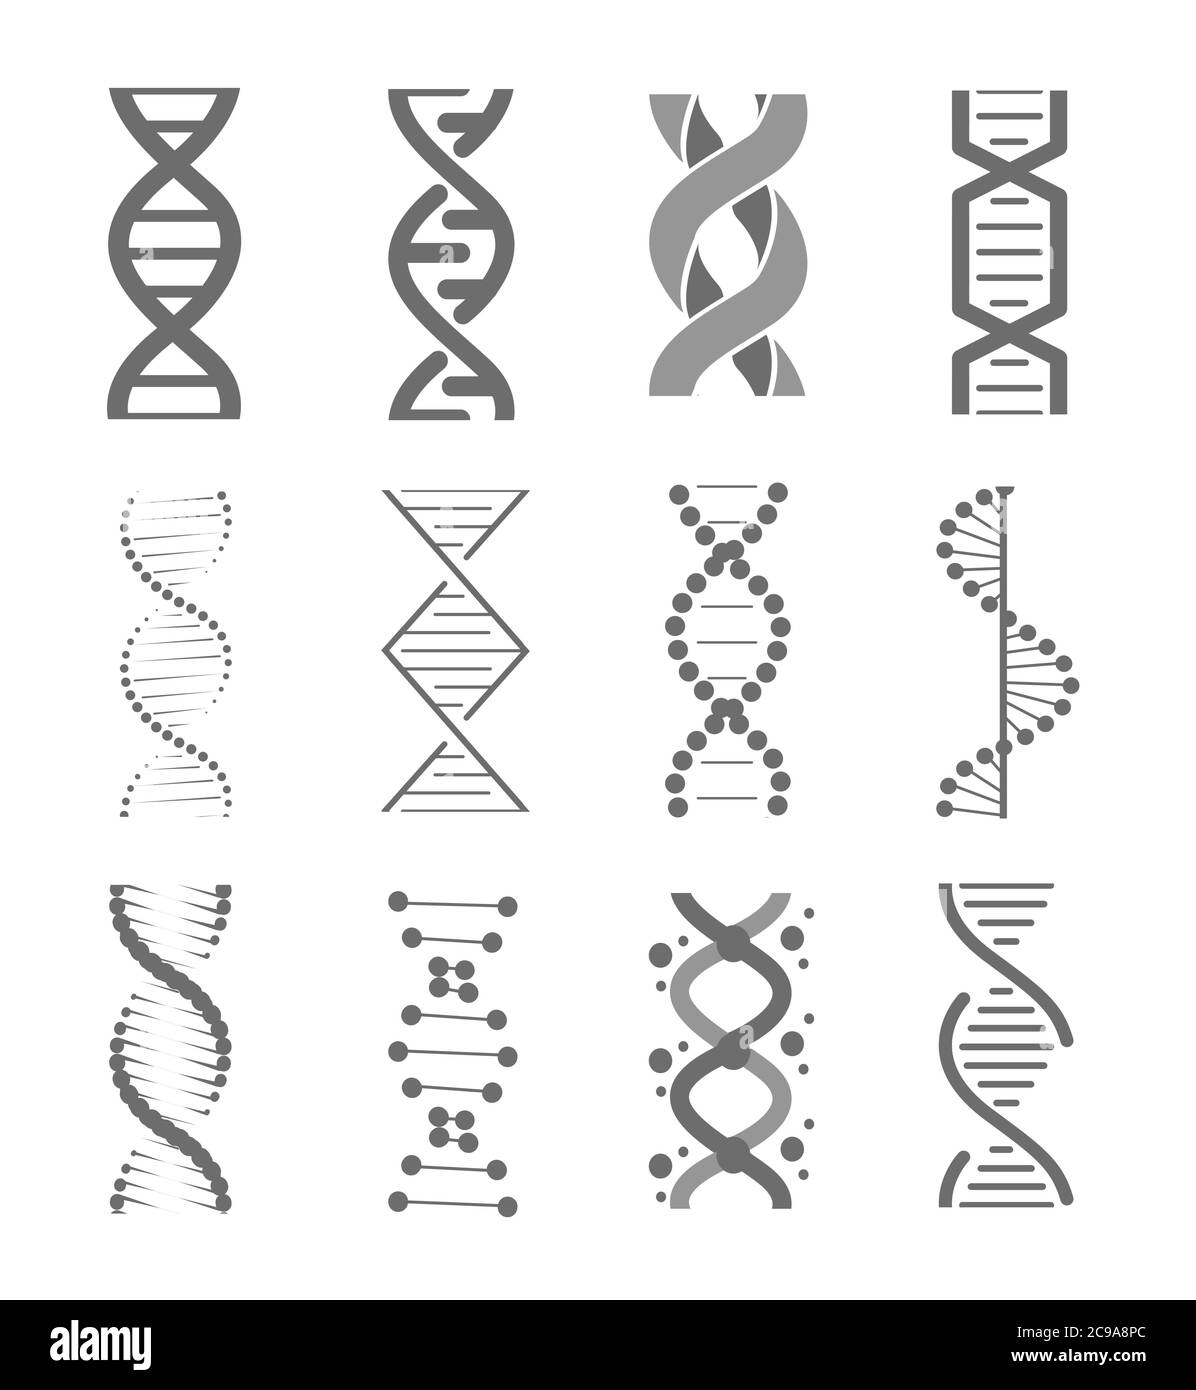 Human dna research technology symbols. Adn helix structure, genomic model and human genetics code. Vector isolated illustration set Stock Vector